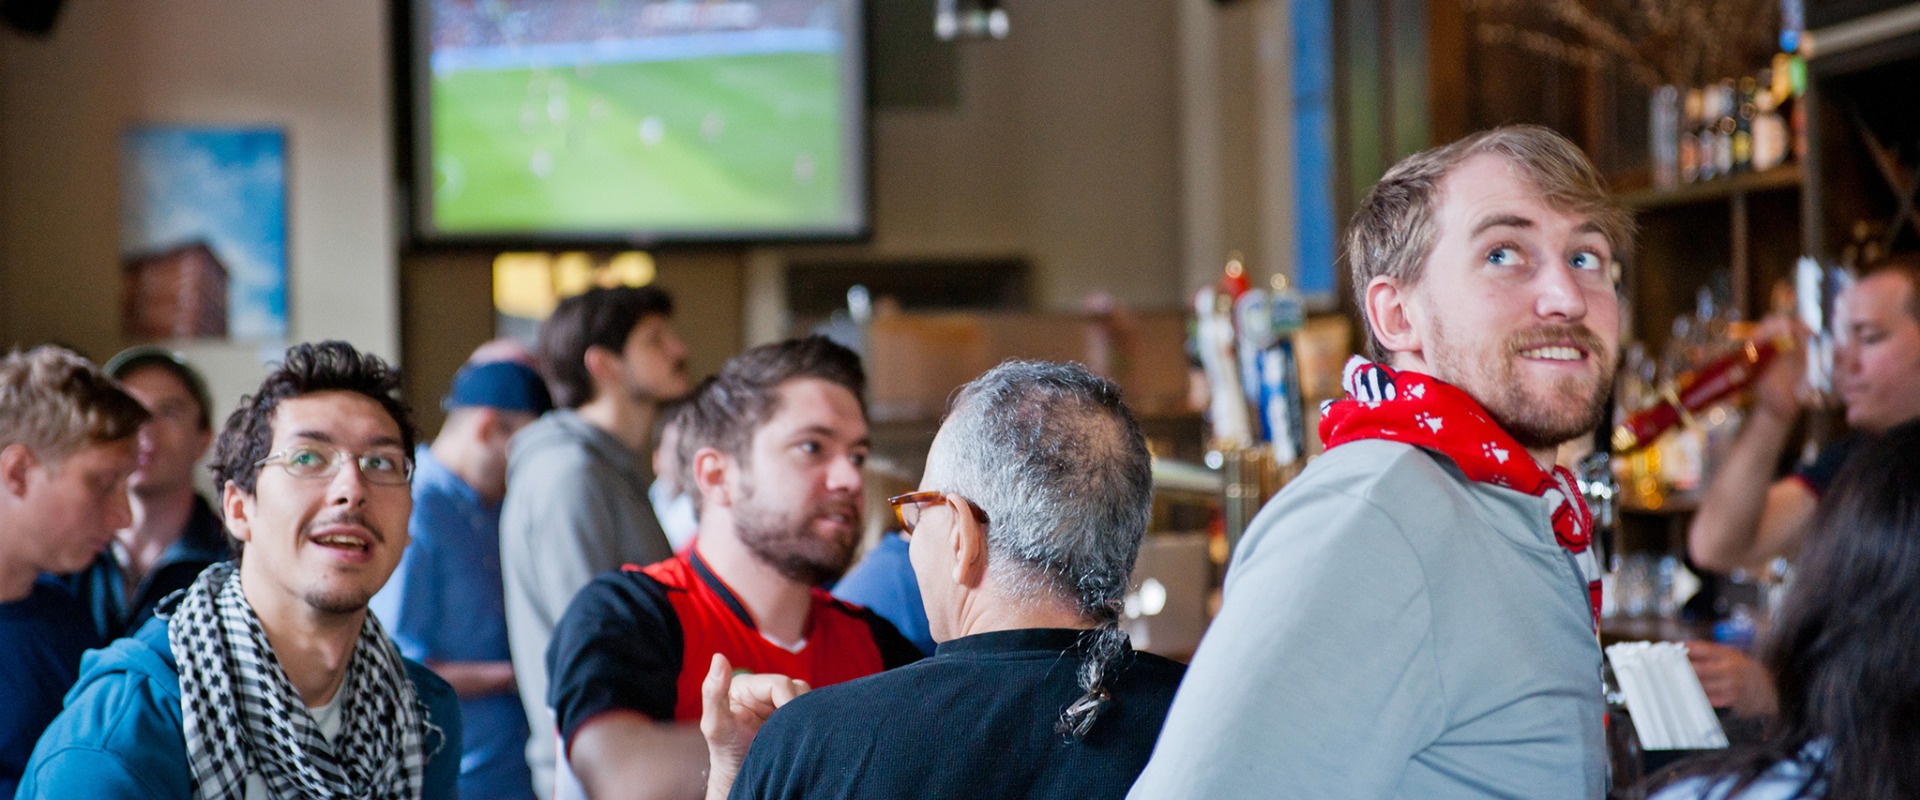 The Ultimate Guide to Finding the Best Happy Hour Deals at Sports Bars in Brooklyn, NY